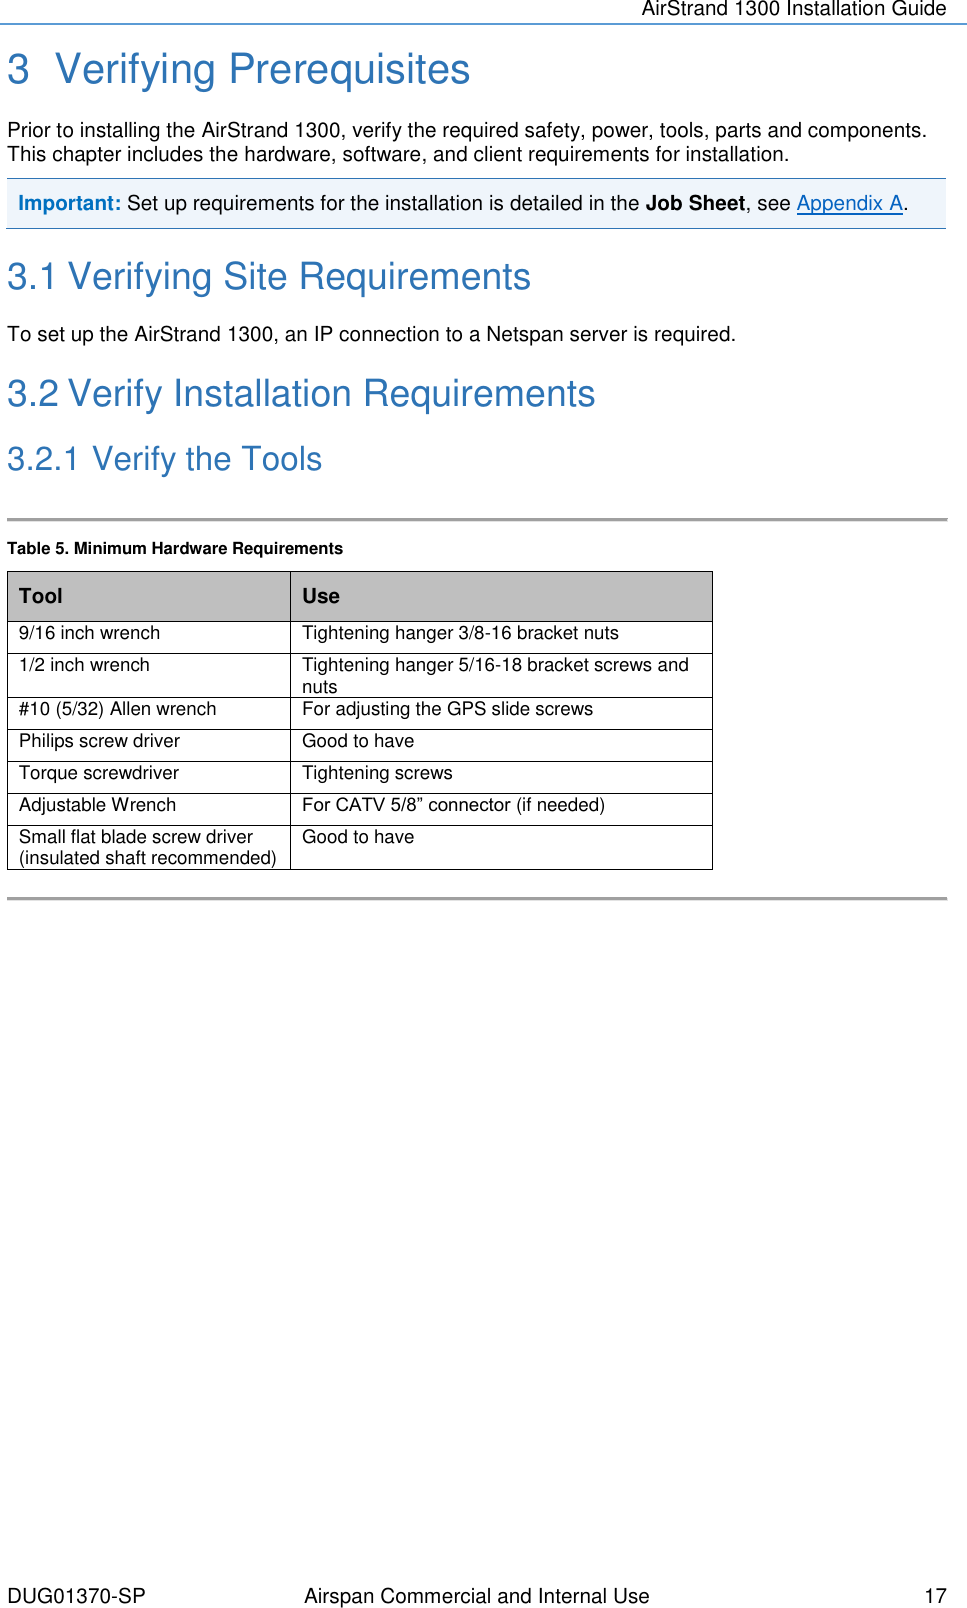 AirStrand 1300 Installation Guide  DUG01370-SP Airspan Commercial and Internal Use  17 3  Verifying Prerequisites Prior to installing the AirStrand 1300, verify the required safety, power, tools, parts and components. This chapter includes the hardware, software, and client requirements for installation. Important: Set up requirements for the installation is detailed in the Job Sheet, see Appendix A.  3.1 Verifying Site Requirements To set up the AirStrand 1300, an IP connection to a Netspan server is required. 3.2 Verify Installation Requirements 3.2.1 Verify the Tools  Table 5. Minimum Hardware Requirements Tool Use 9/16 inch wrench Tightening hanger 3/8-16 bracket nuts 1/2 inch wrench  Tightening hanger 5/16-18 bracket screws and nuts #10 (5/32) Allen wrench For adjusting the GPS slide screws Philips screw driver Good to have Torque screwdriver Tightening screws Adjustable Wrench For CATV 5/8” connector (if needed) Small flat blade screw driver (insulated shaft recommended) Good to have      